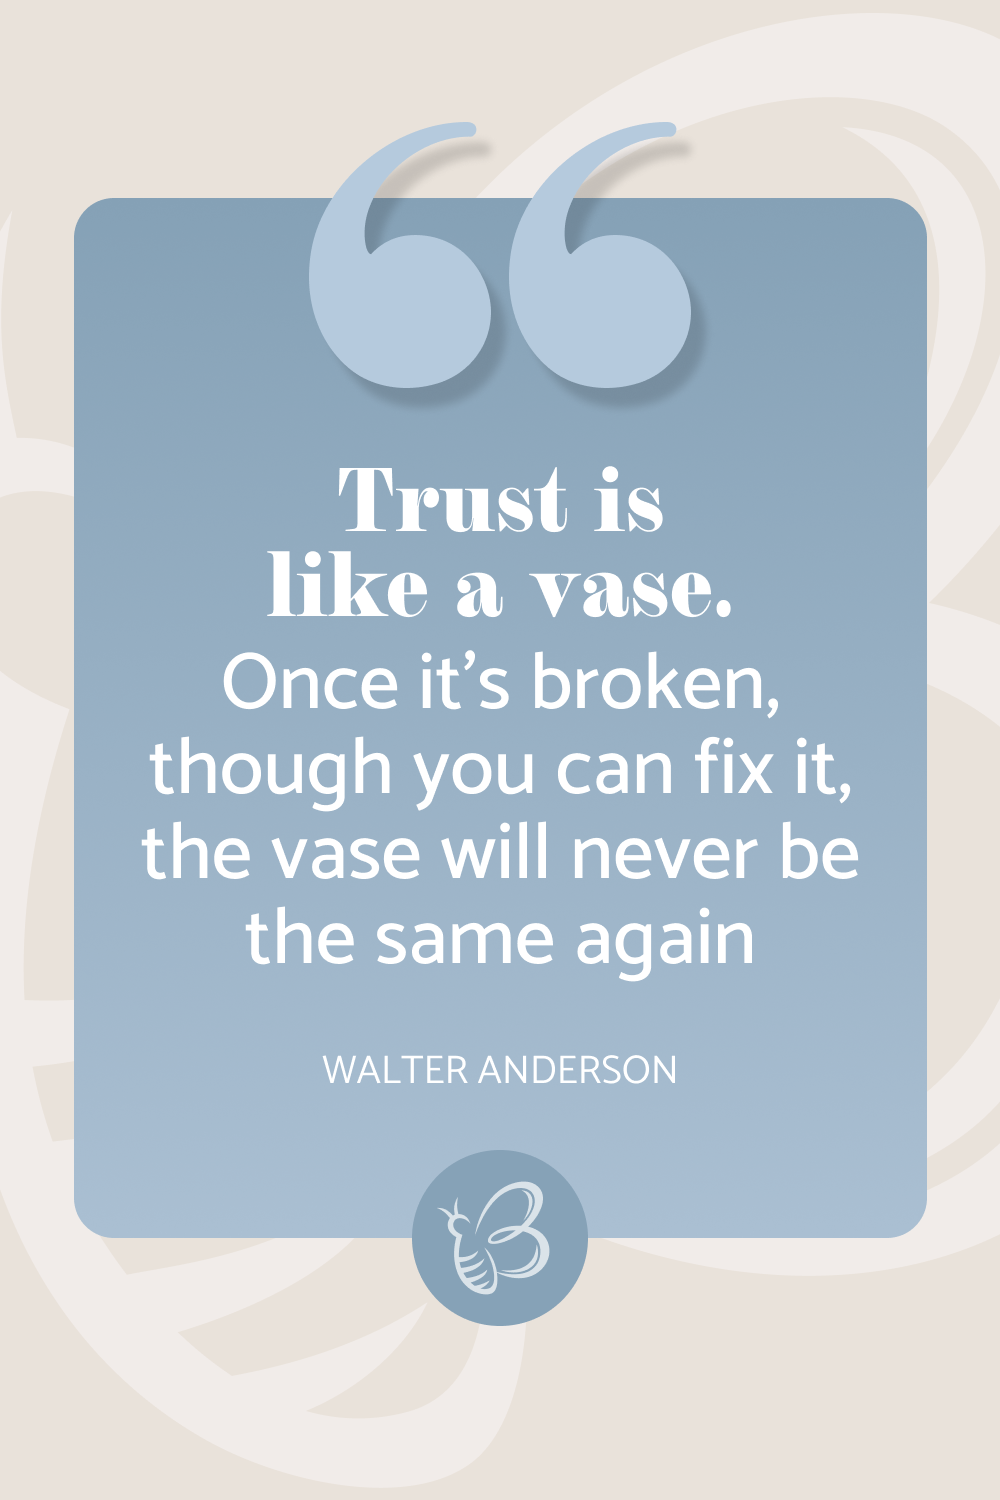 Trust is like a vase. Once it’s broken, though you can fix it, the vase will never be the same again